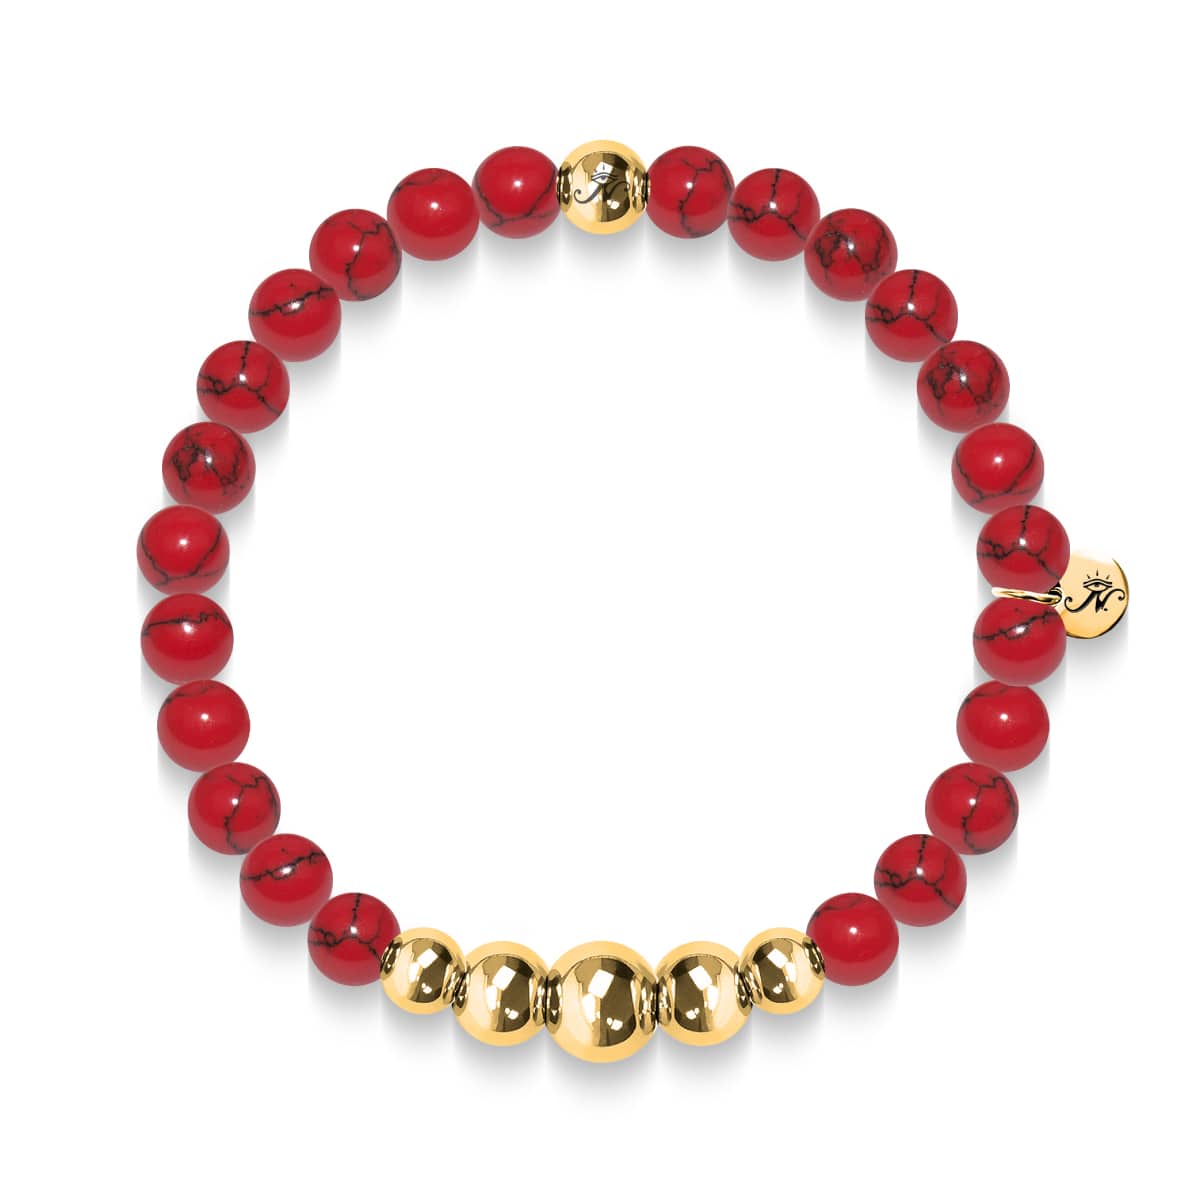 Tranquility | Gold Aura Red Turquoise Bracelet